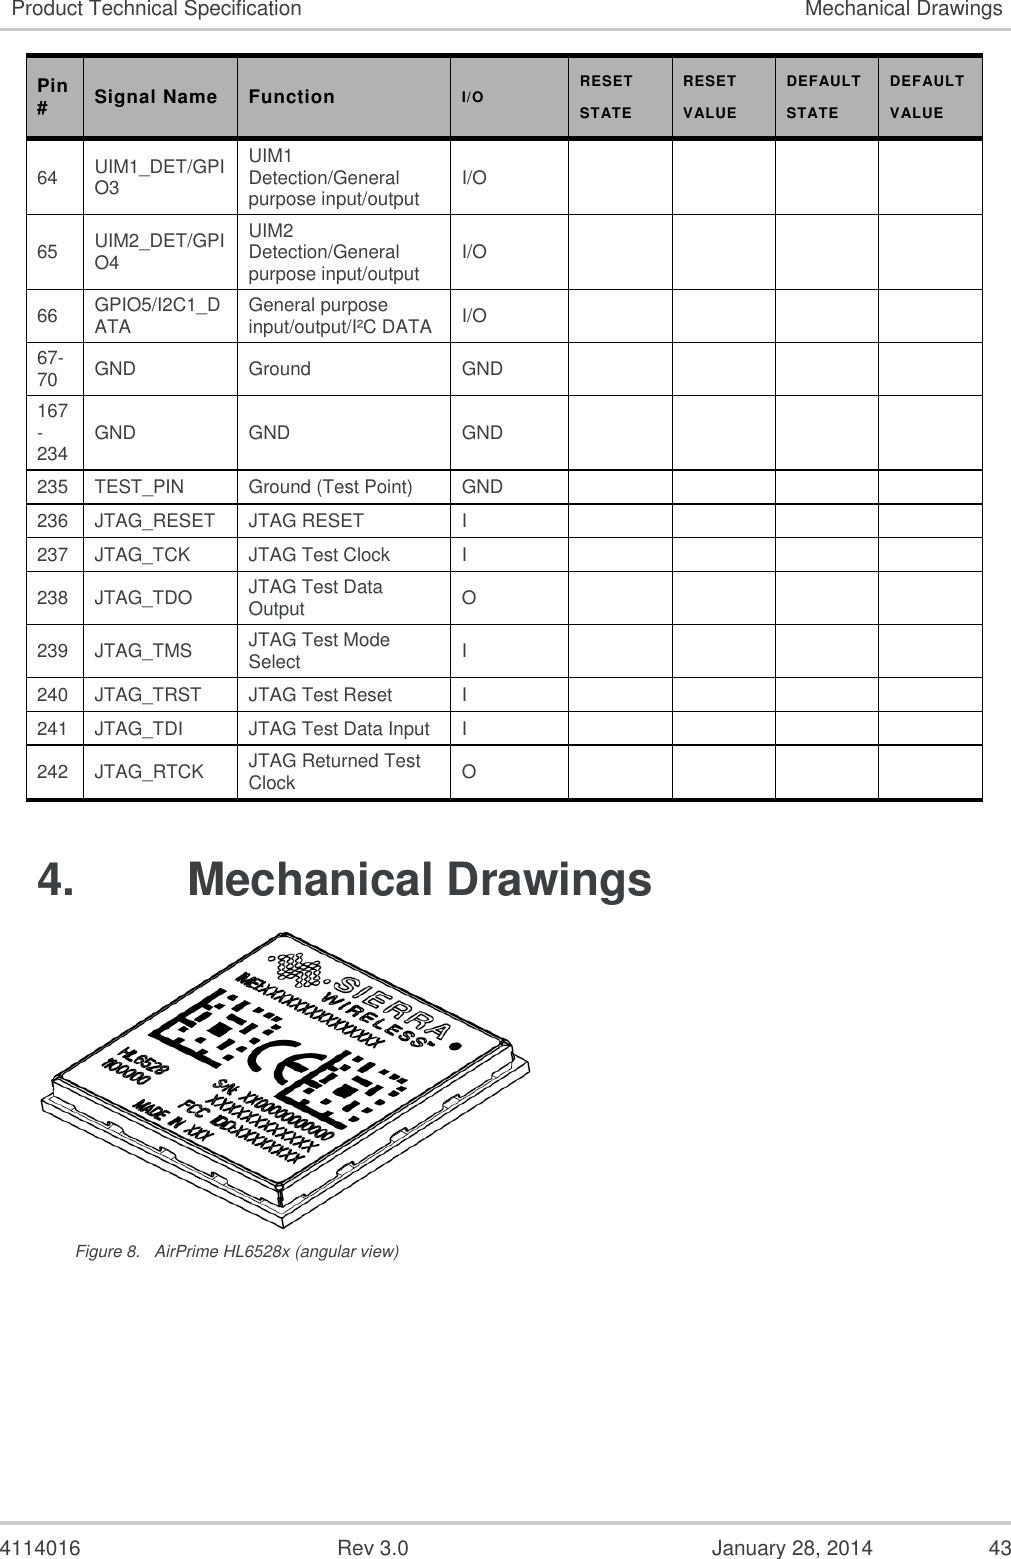  4114016  Rev 3.0  January 28, 2014  43 Product Technical Specification Mechanical Drawings Pin # Signal Name Function I/O RESET STATE RESET VALUE DEFAULT STATE DEFAULT VALUE 64 UIM1_DET/GPIO3 UIM1 Detection/General purpose input/output I/O     65 UIM2_DET/GPIO4 UIM2 Detection/General purpose input/output I/O     66 GPIO5/I2C1_DATA General purpose input/output/I²C DATA I/O     67-70 GND Ground GND     167-234 GND GND GND     235 TEST_PIN Ground (Test Point) GND     236 JTAG_RESET JTAG RESET I     237 JTAG_TCK JTAG Test Clock I     238 JTAG_TDO JTAG Test Data Output O     239 JTAG_TMS JTAG Test Mode Select I     240 JTAG_TRST JTAG Test Reset I     241 JTAG_TDI JTAG Test Data Input I     242 JTAG_RTCK JTAG Returned Test Clock O     4.  Mechanical Drawings  Figure 8.  AirPrime HL6528x (angular view) 